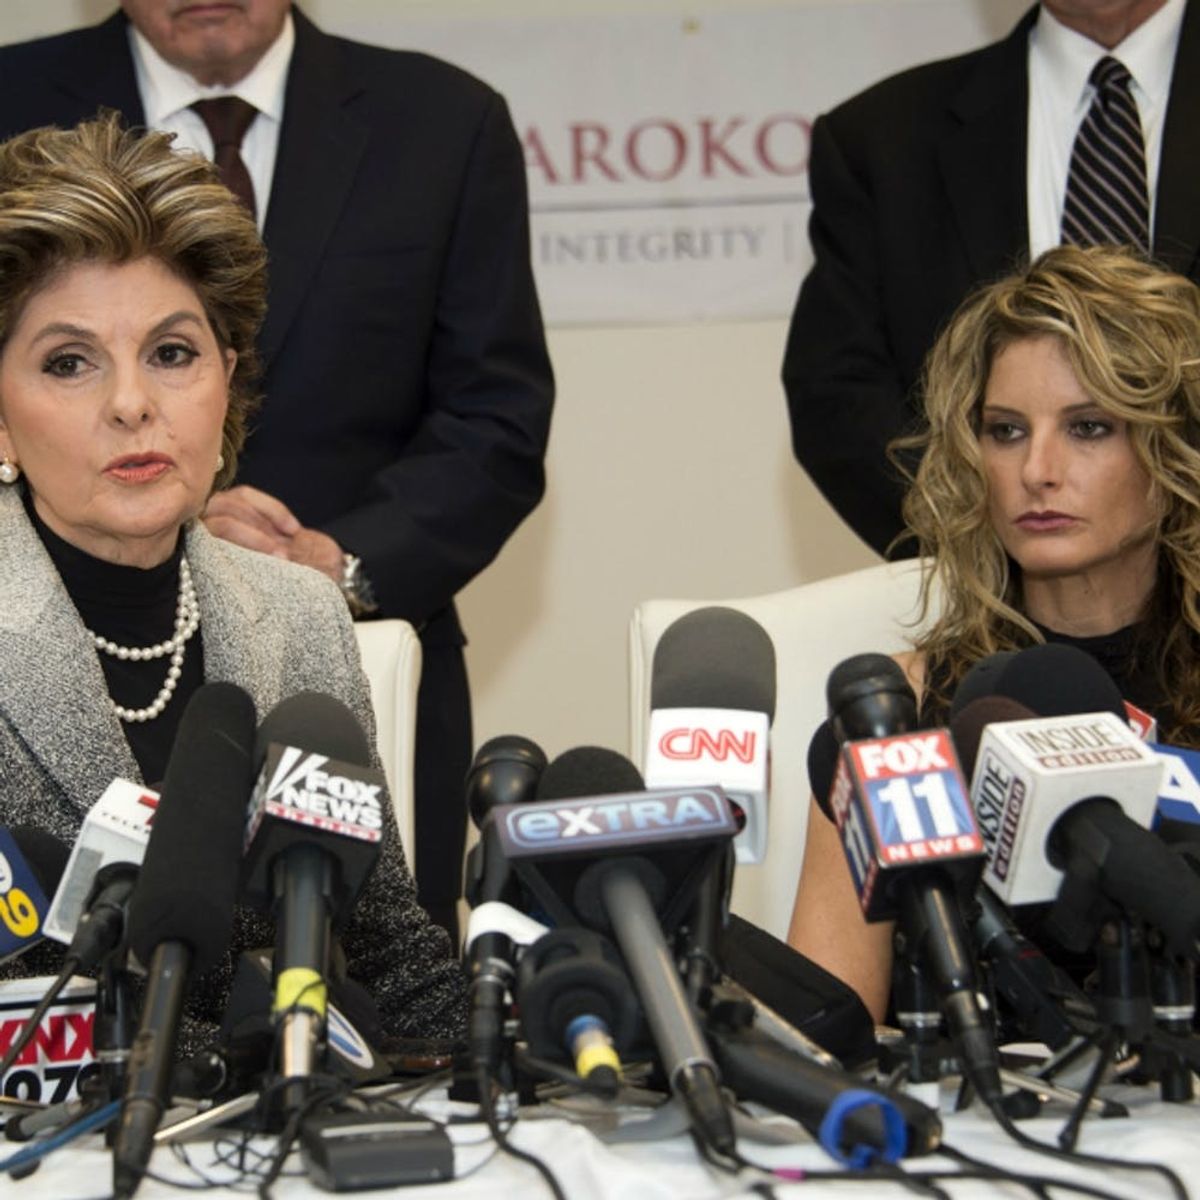 A Former The Apprentice Contestant Has Filed a Lawsuit Against PEOTUS Donald Trump (and It Doesn’t Look Great for Him)